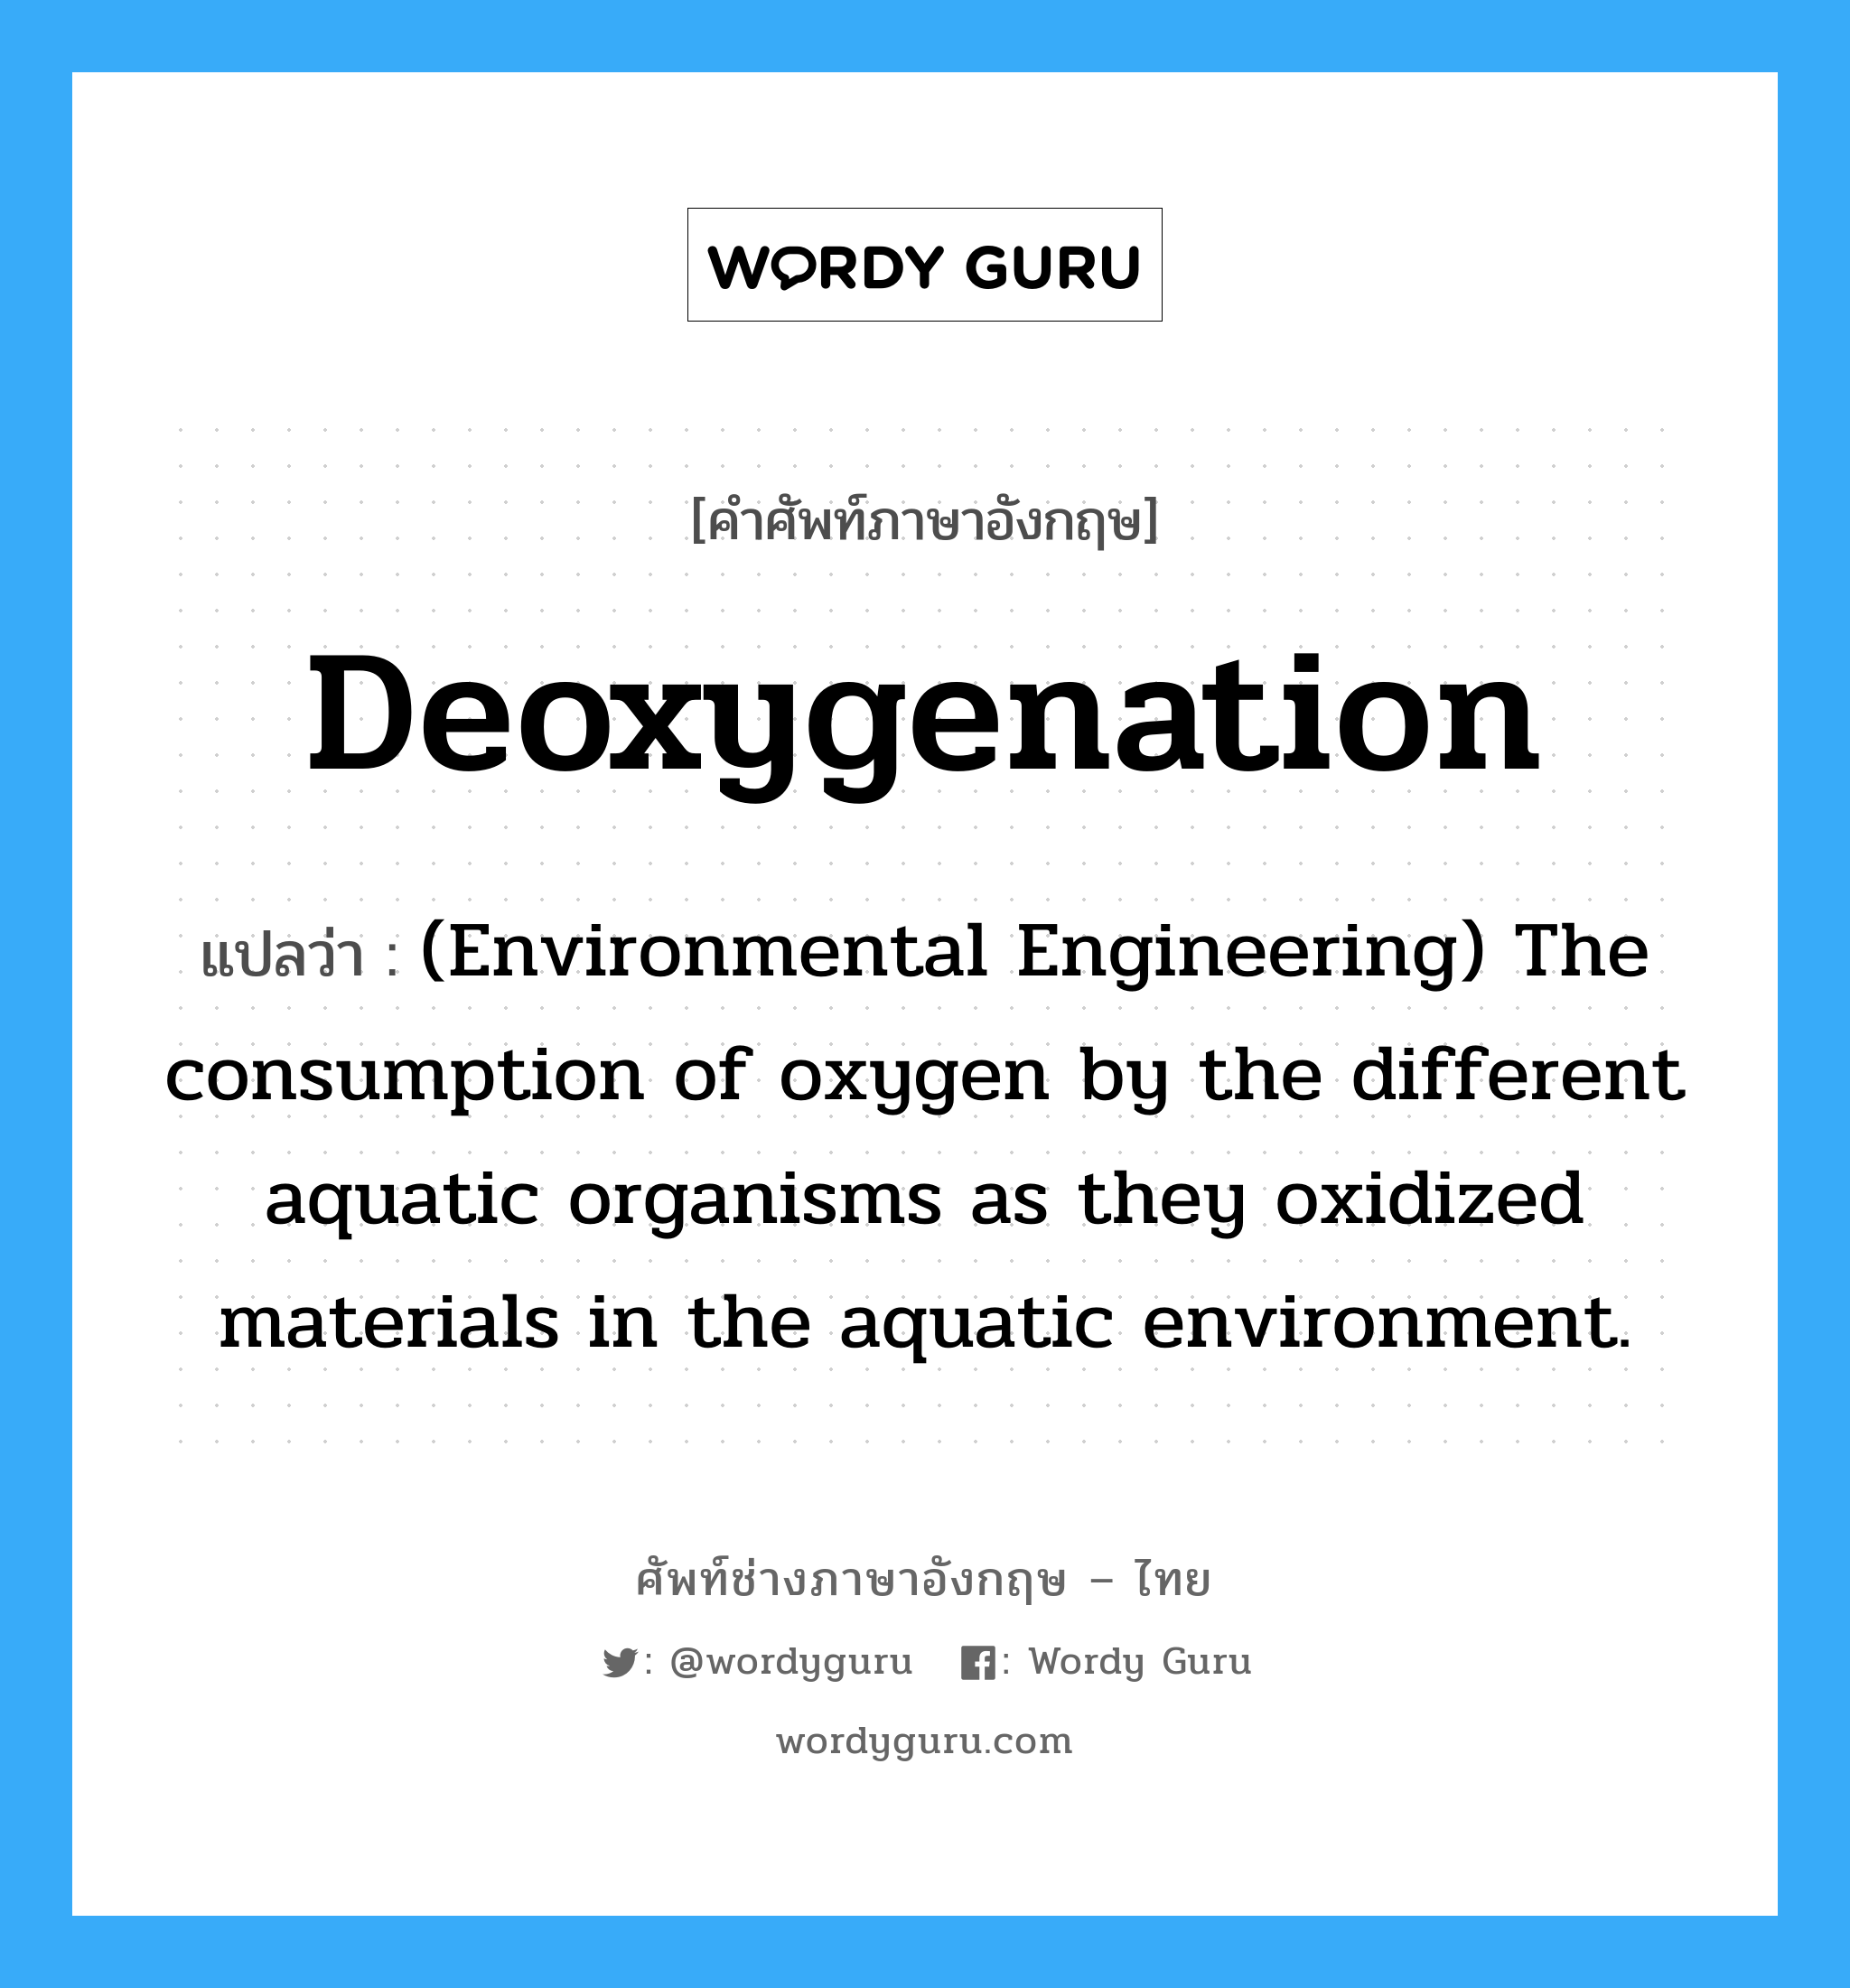 (Environmental Engineering) The consumption of oxygen by the different aquatic organisms as they oxidized materials in the aquatic environment. ภาษาอังกฤษ?, คำศัพท์ช่างภาษาอังกฤษ - ไทย (Environmental Engineering) The consumption of oxygen by the different aquatic organisms as they oxidized materials in the aquatic environment. คำศัพท์ภาษาอังกฤษ (Environmental Engineering) The consumption of oxygen by the different aquatic organisms as they oxidized materials in the aquatic environment. แปลว่า Deoxygenation